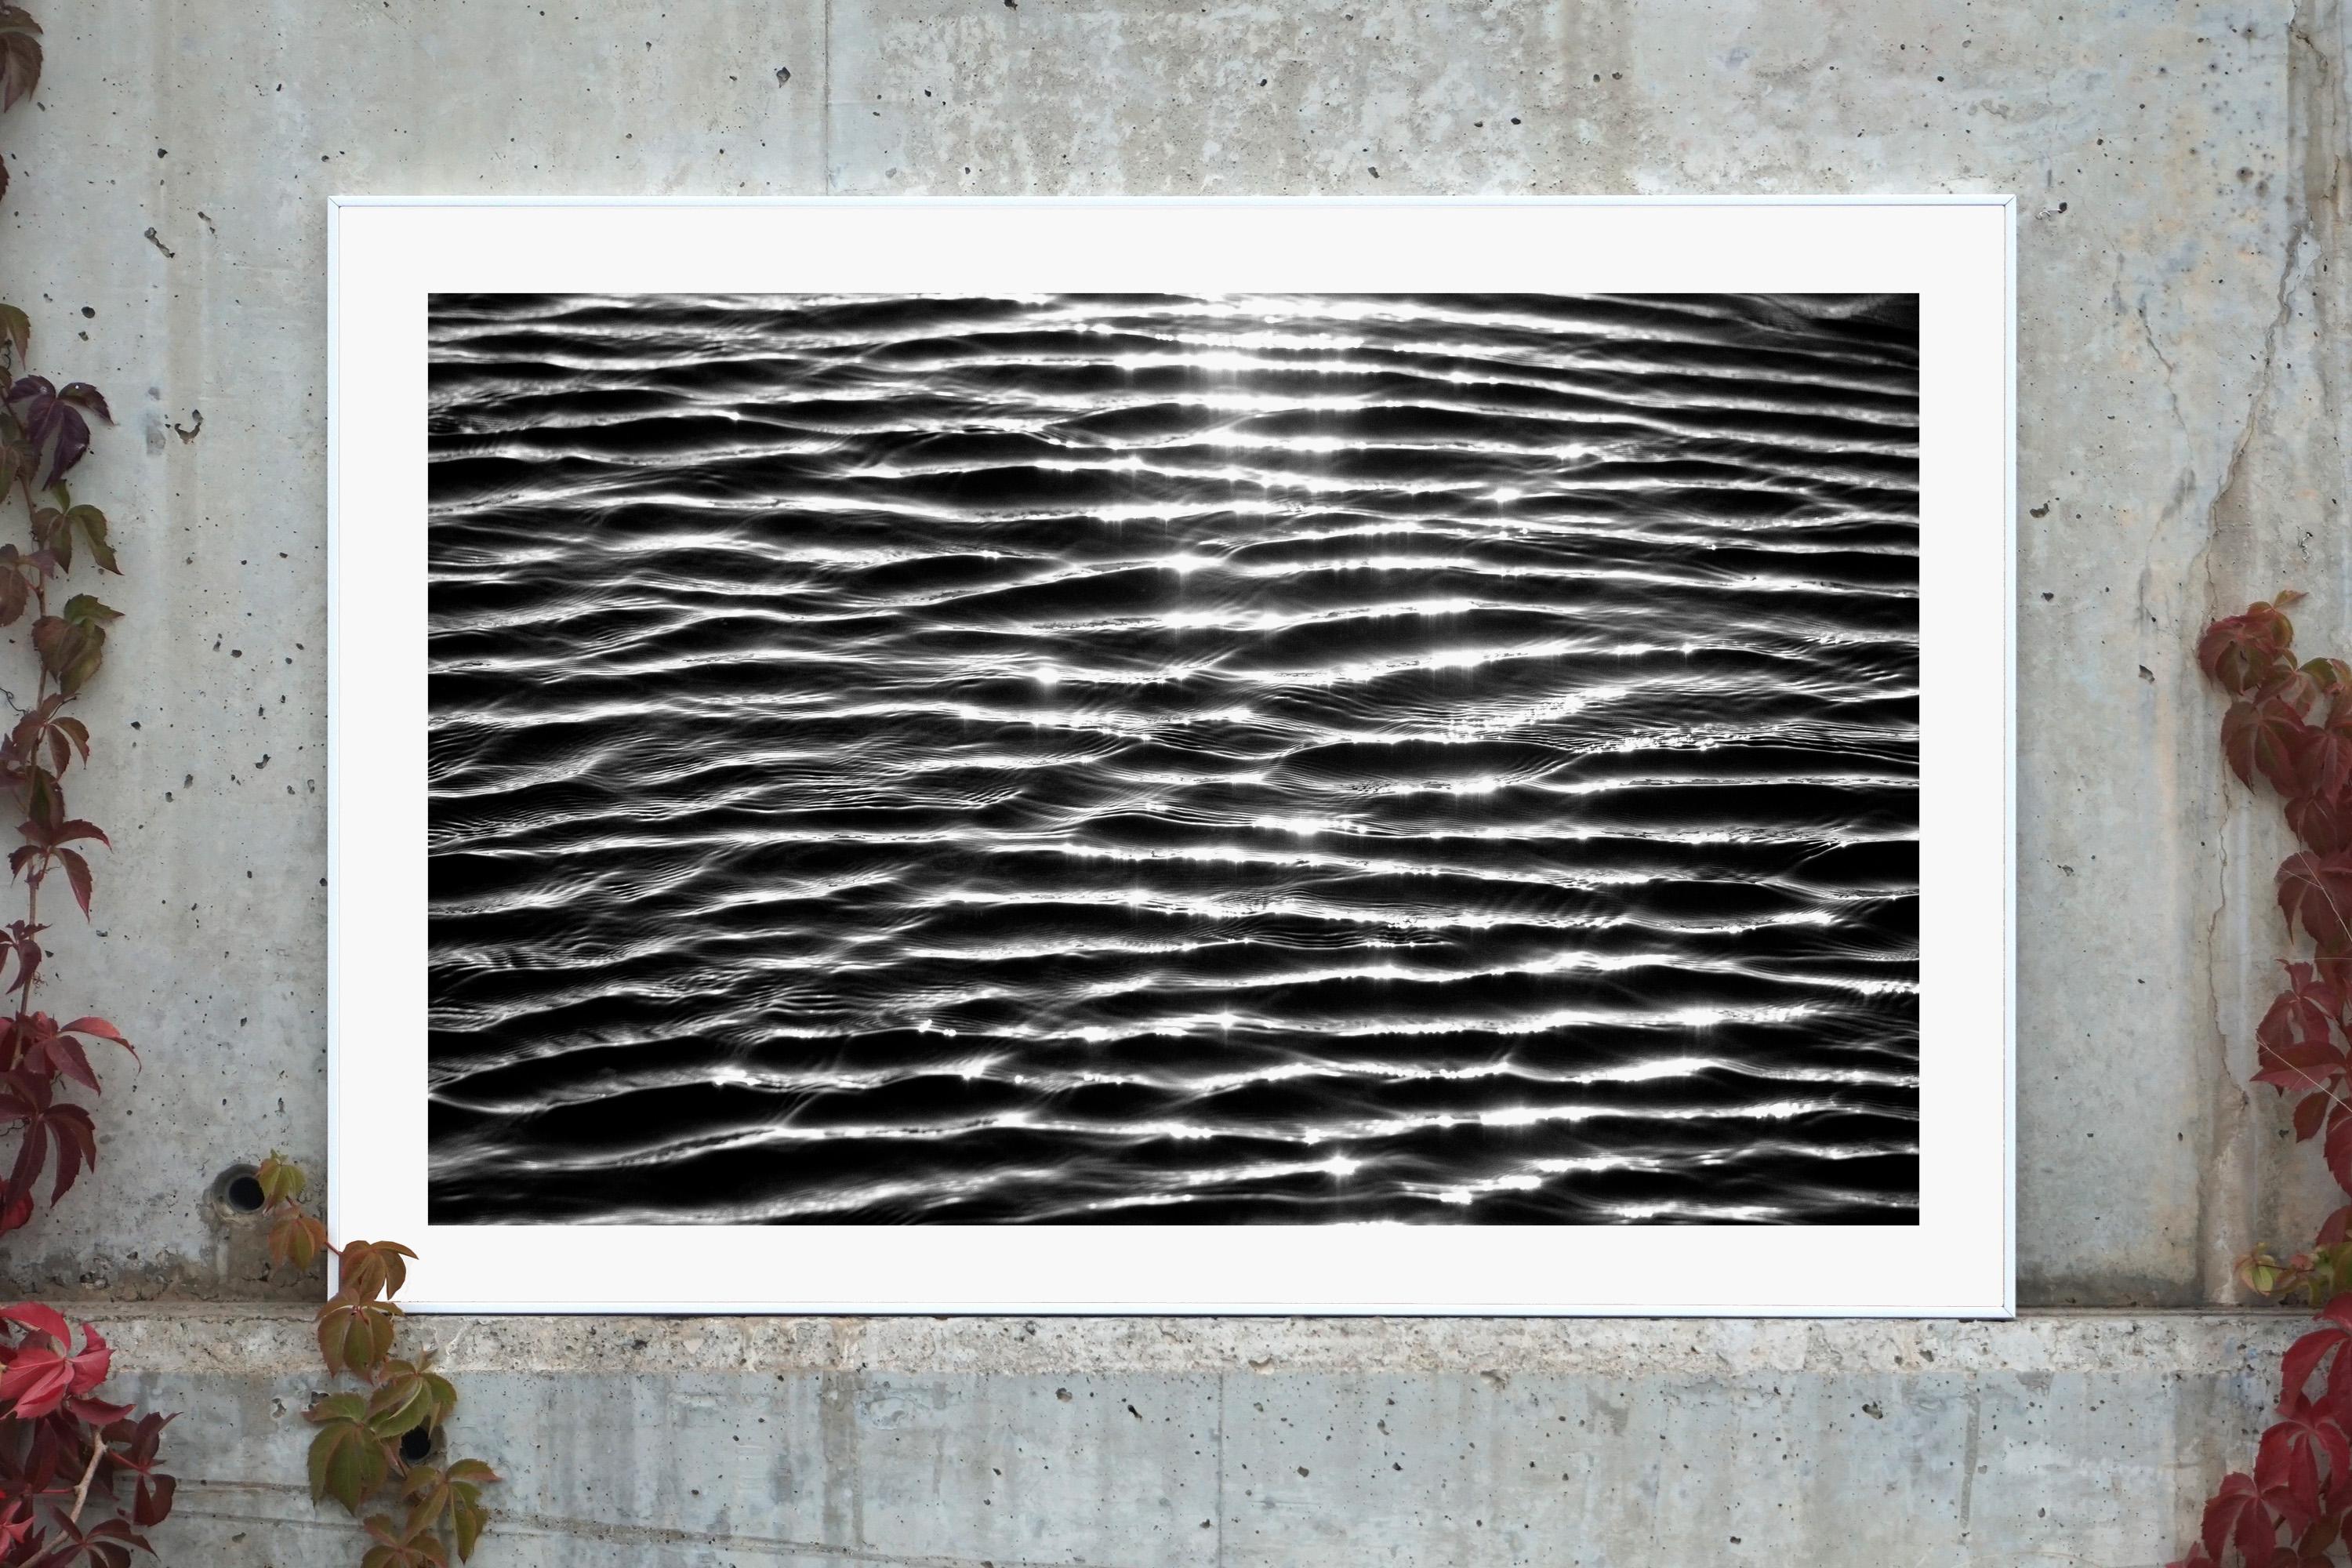 Extra Large Black and White Giclée Print of Tranquil Water Patterns, Seascape - Abstract Photograph by Kind of Cyan